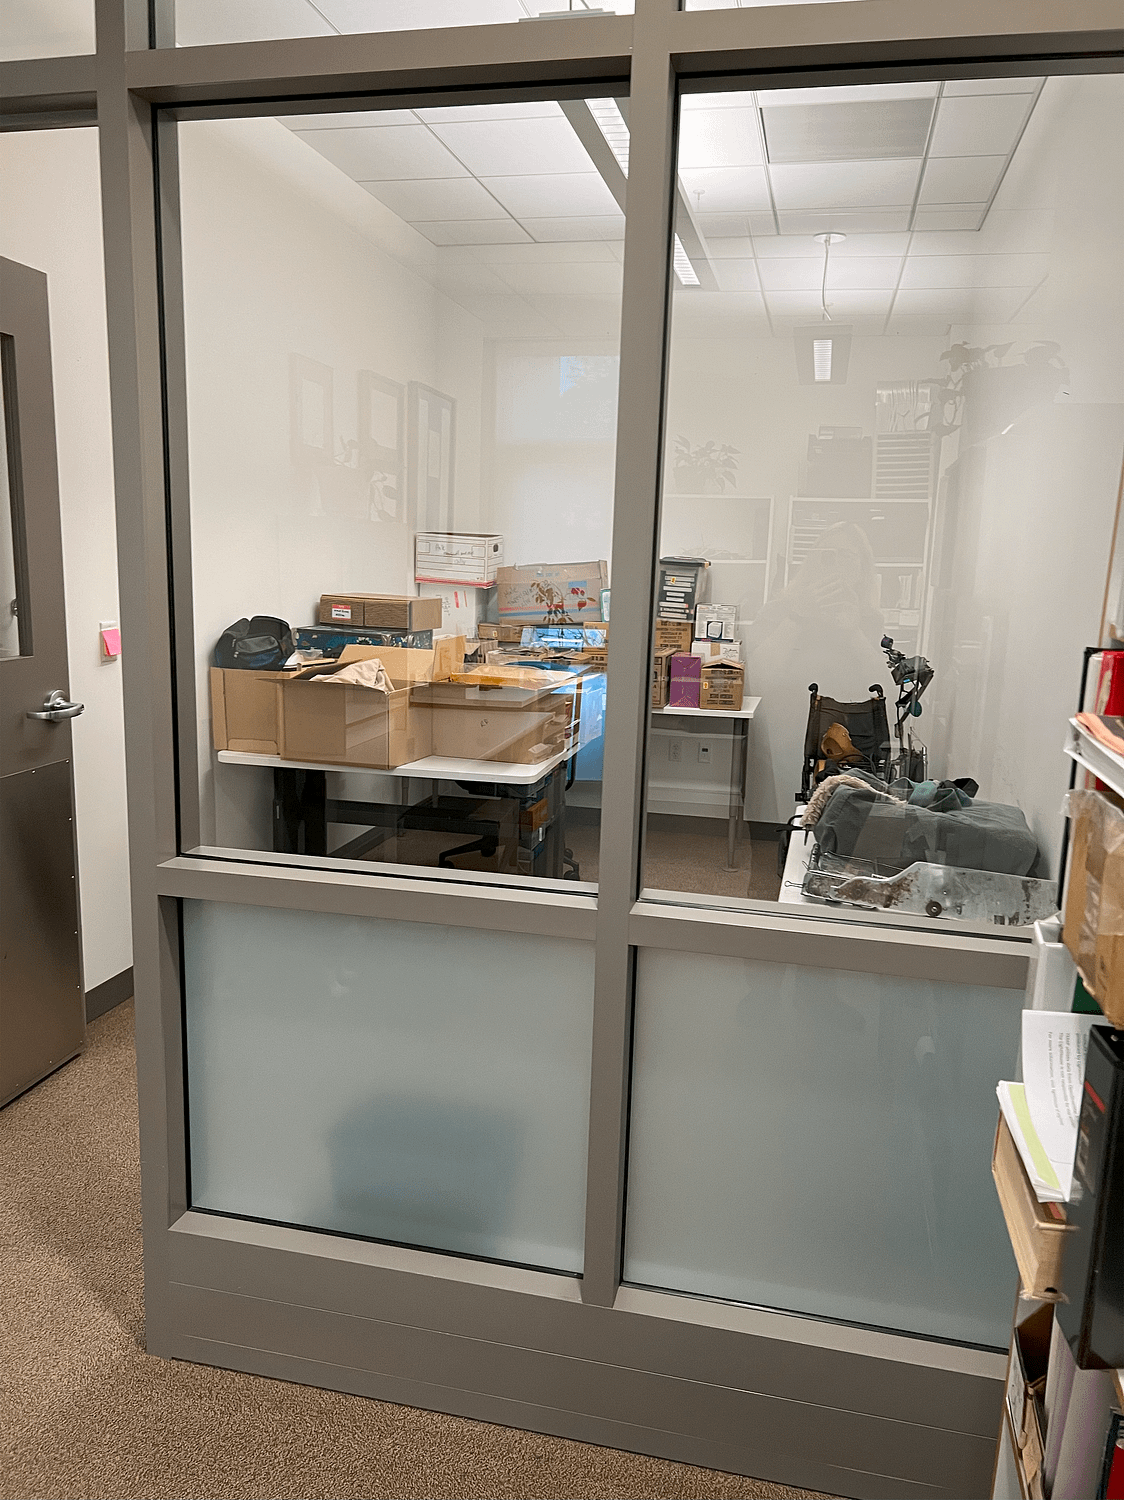 A smaller office with no exterior windows. The room easily fits two large desks and currently holds several packed carboard boxes on the desks, as well as a wheelchair in the corner